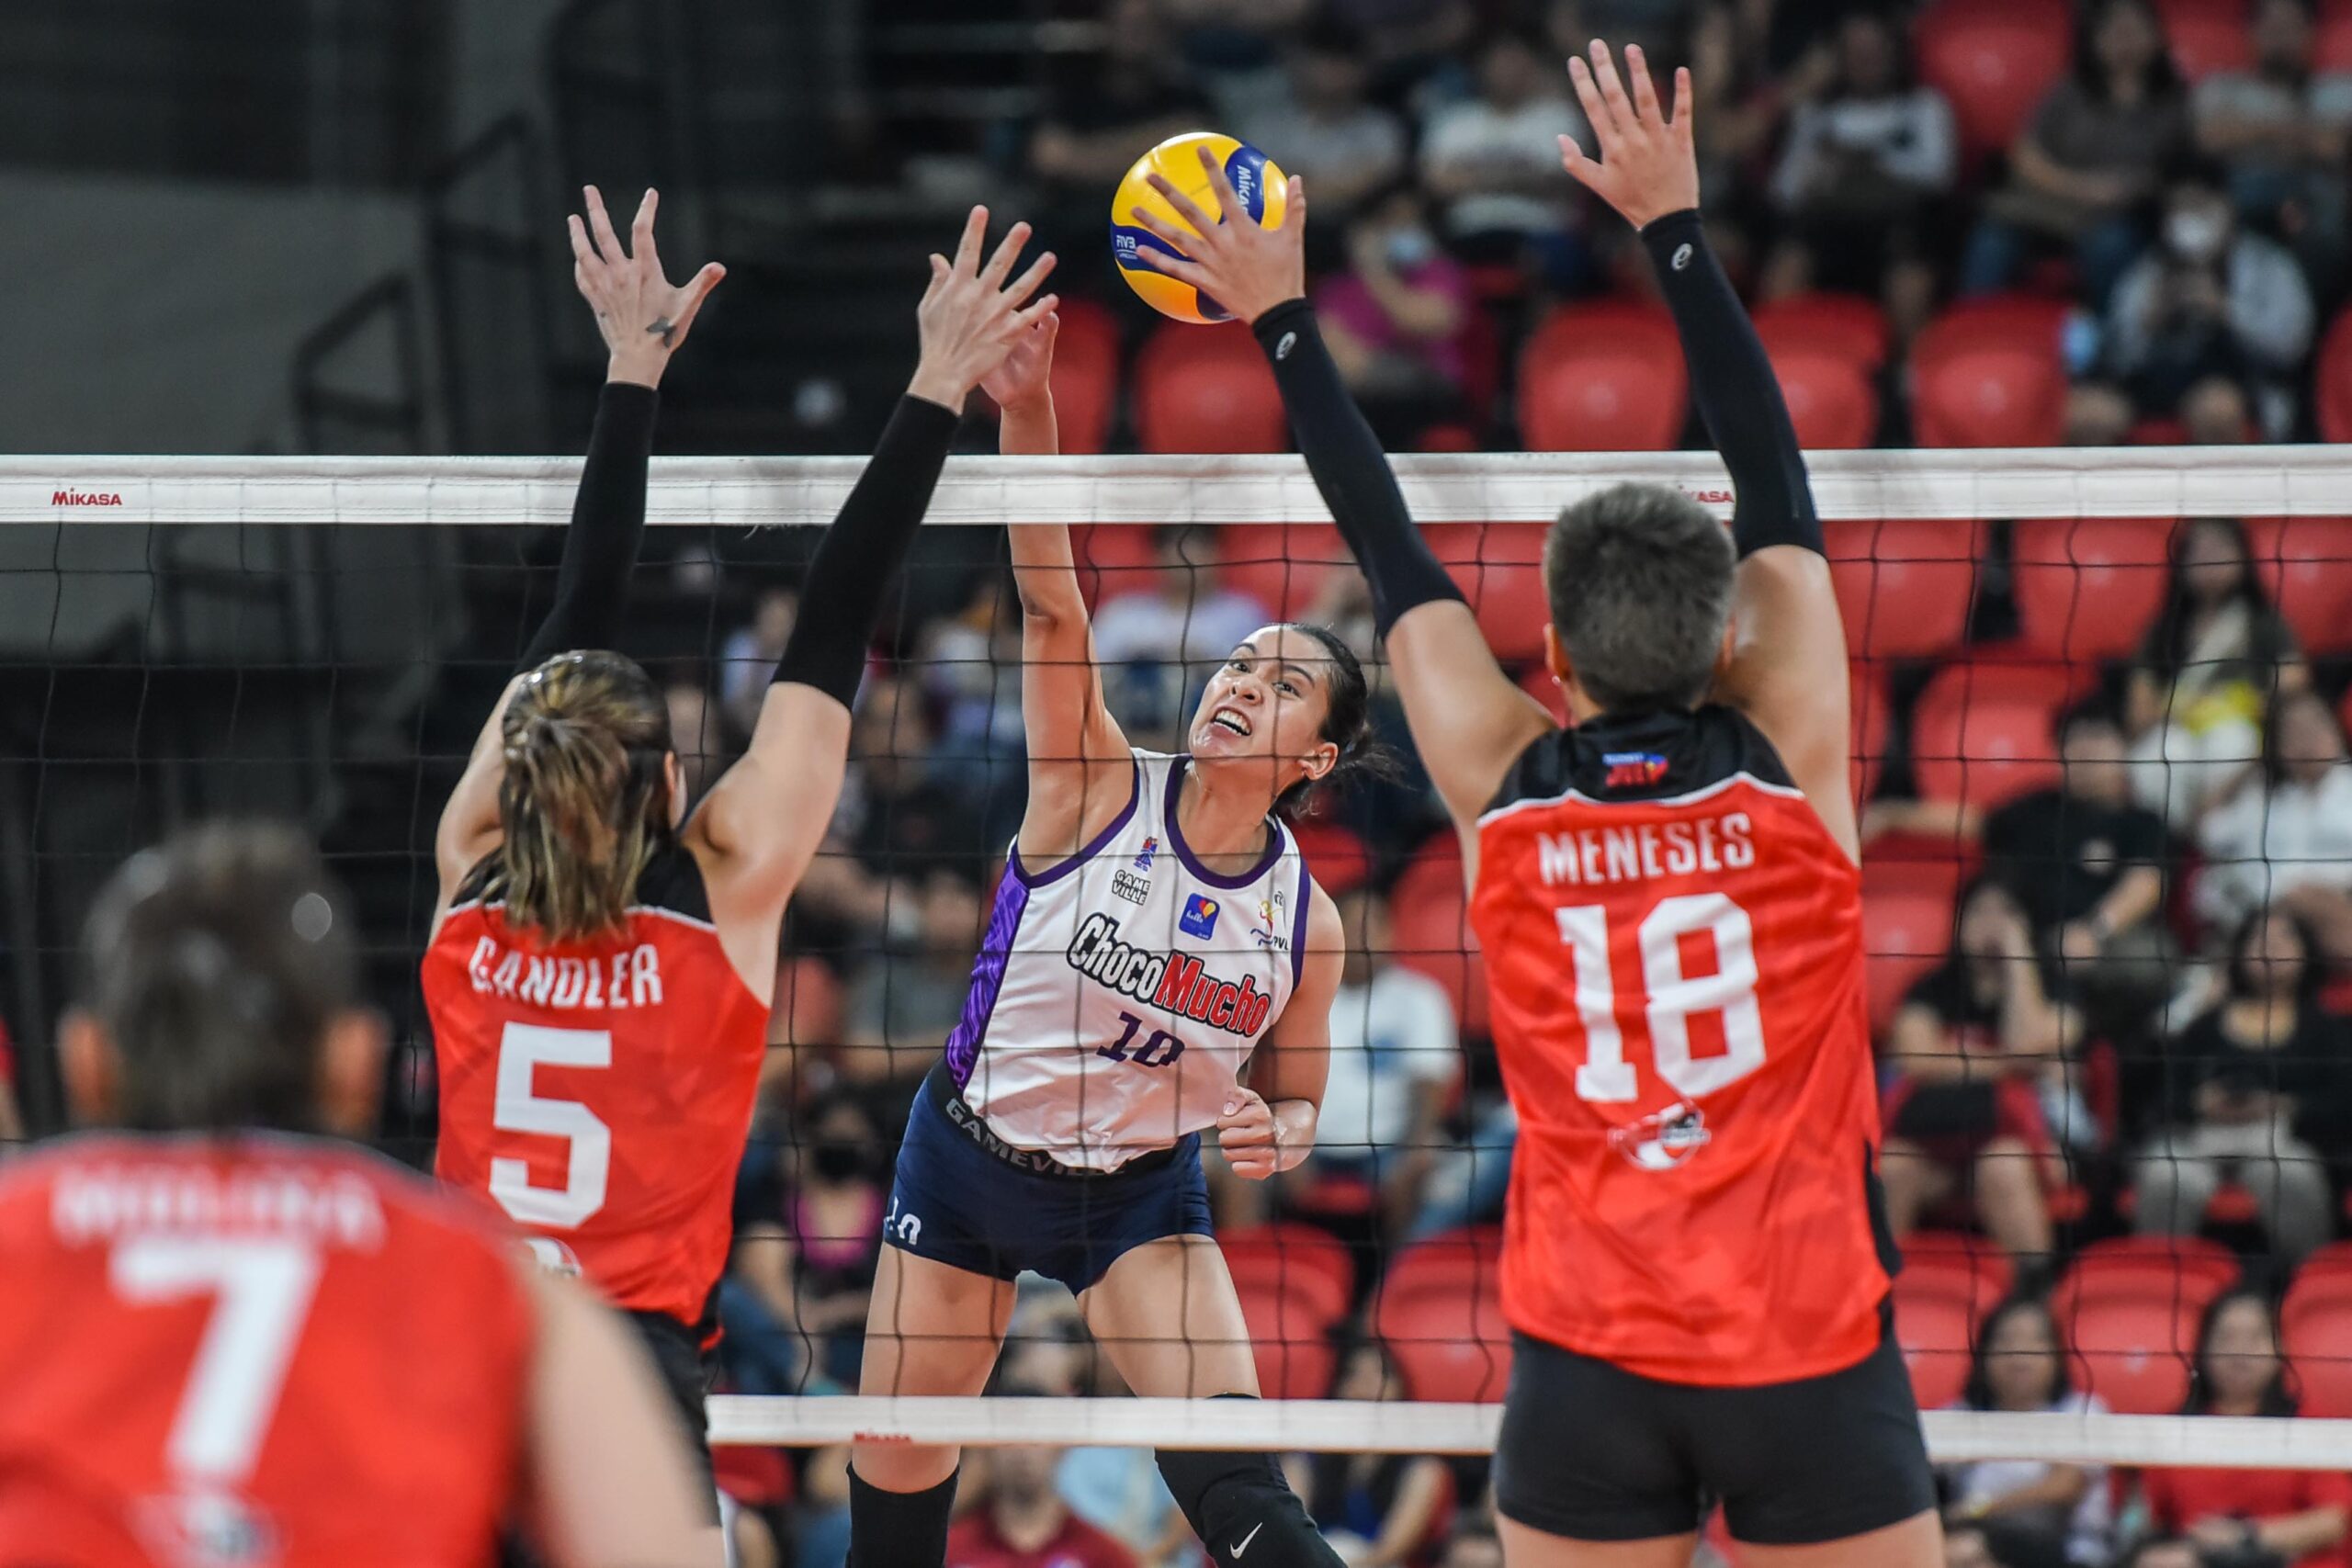 PVL-AFC-Semis-Cignal-vs.-Choco-Mucho-Kat-Tolentino-4813-scaled PVL: No meltdowns this time as Choco Mucho sweeps Cignal, forces do-or-die News PVL Volleyball  - philippine sports news